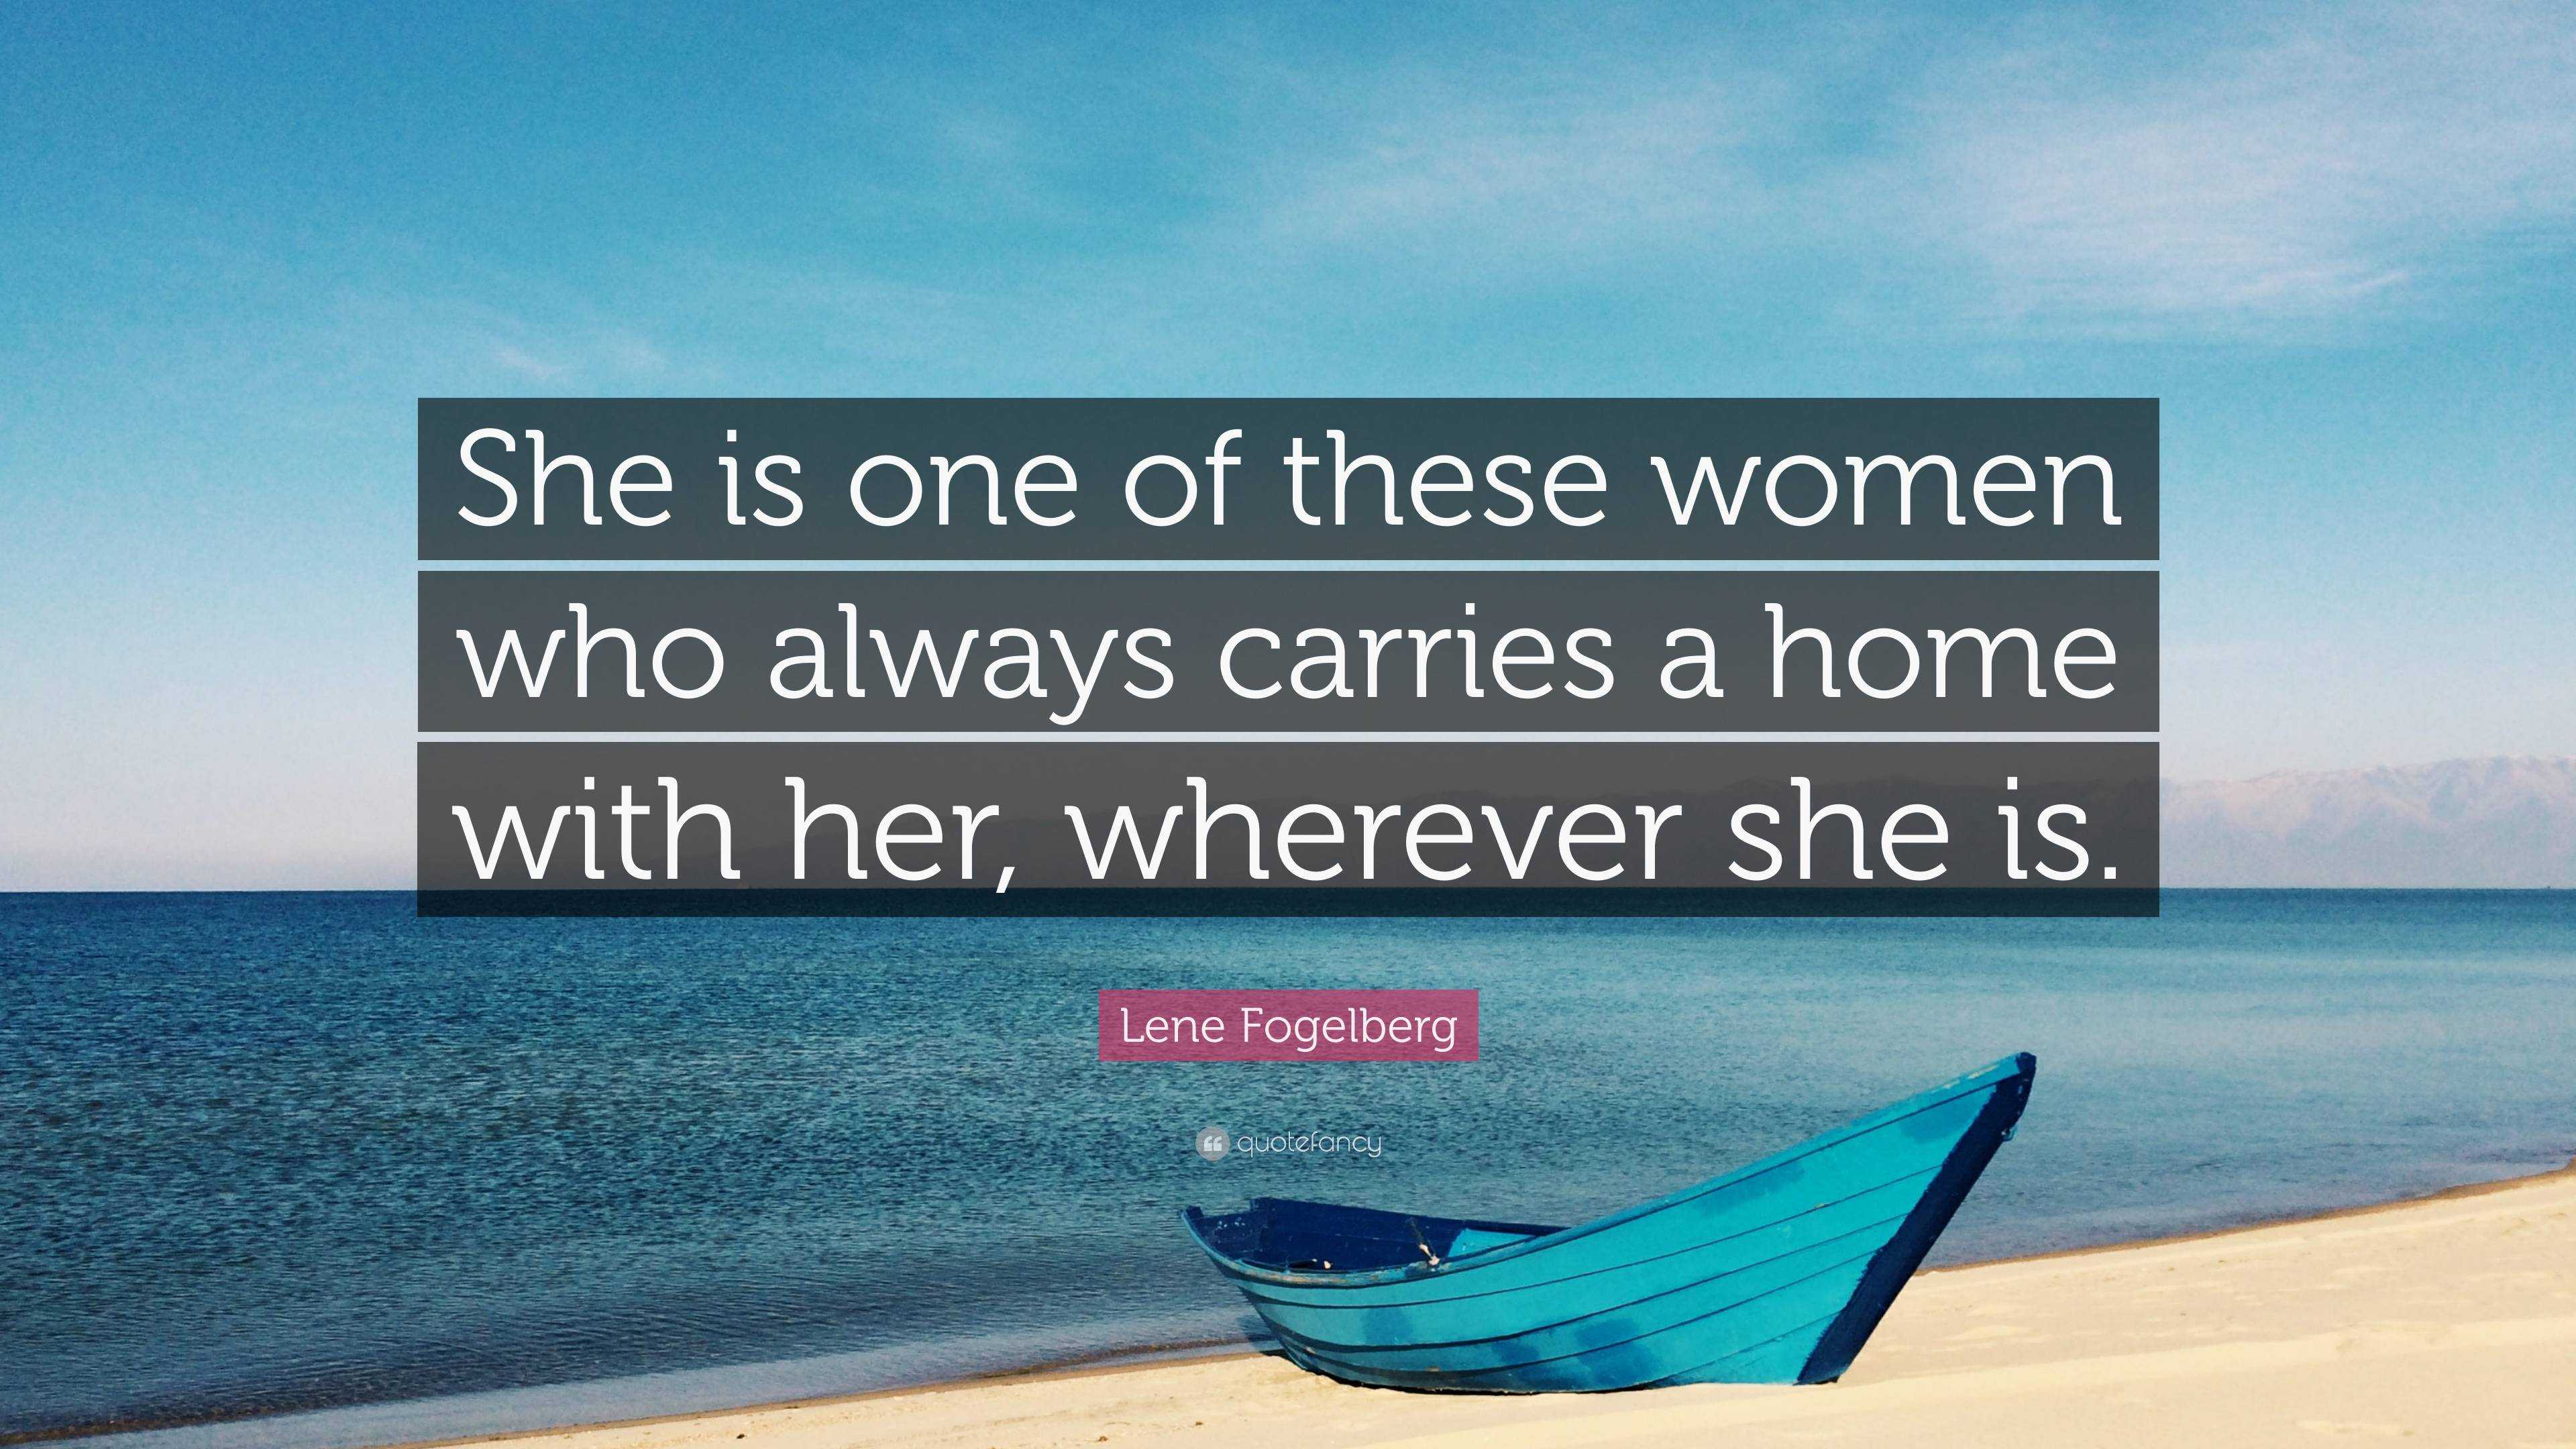 Lene Fogelberg Quote: “She is one of these women who always carries a ...